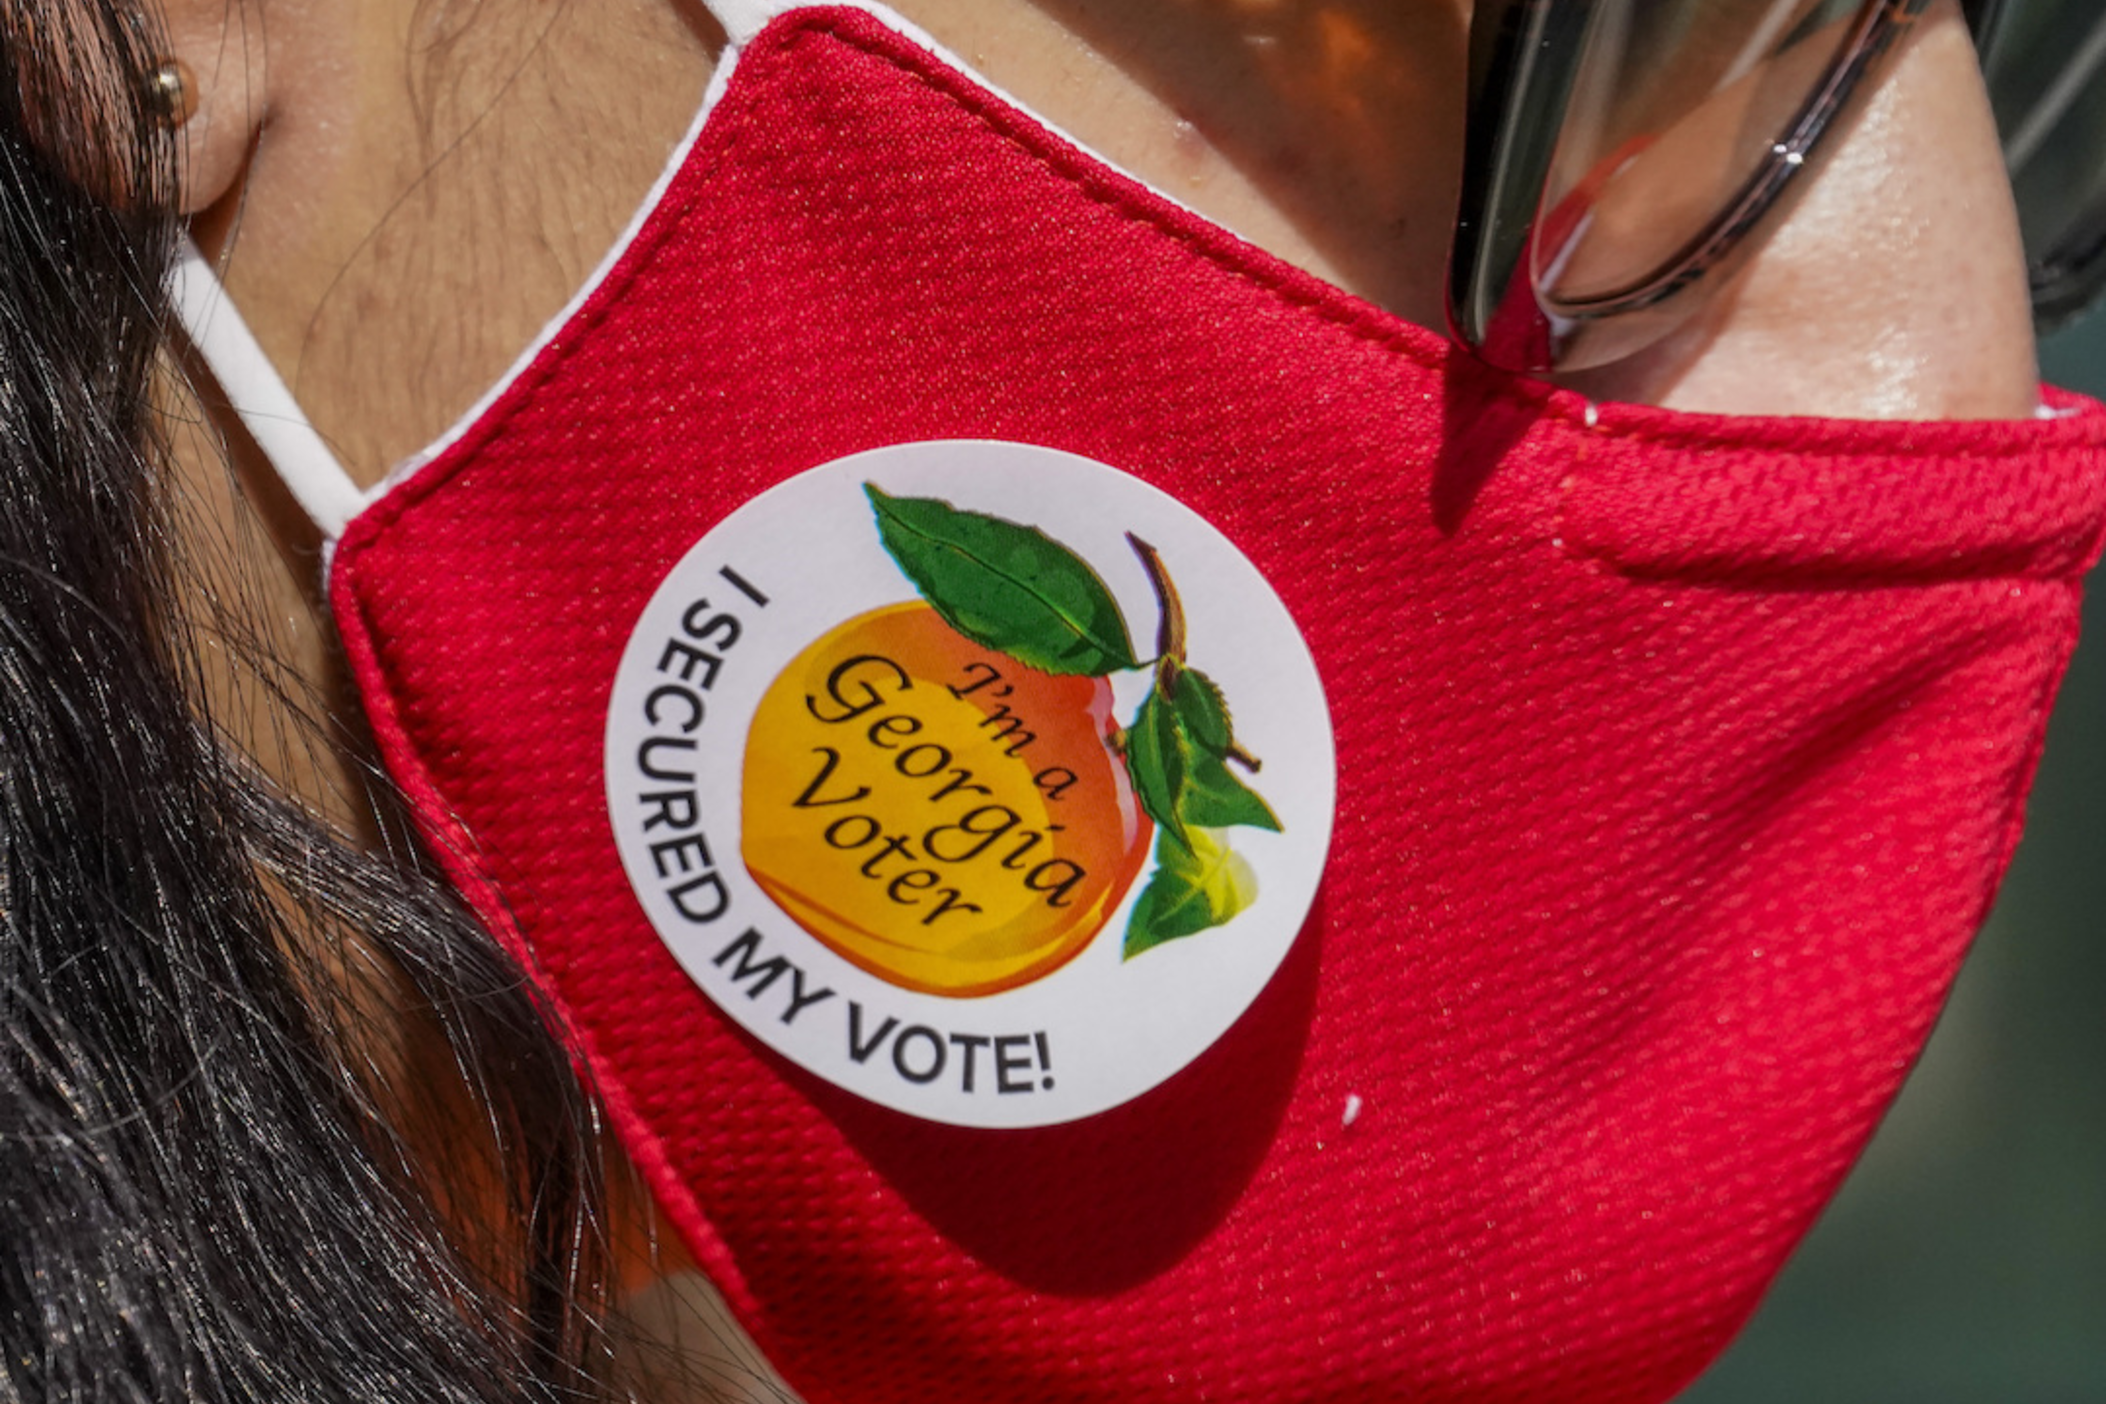 A person wears an “I’m a Georgia Voter” sticker after voting on Election Day in Atlanta on Tuesday, Nov. 3, 2020